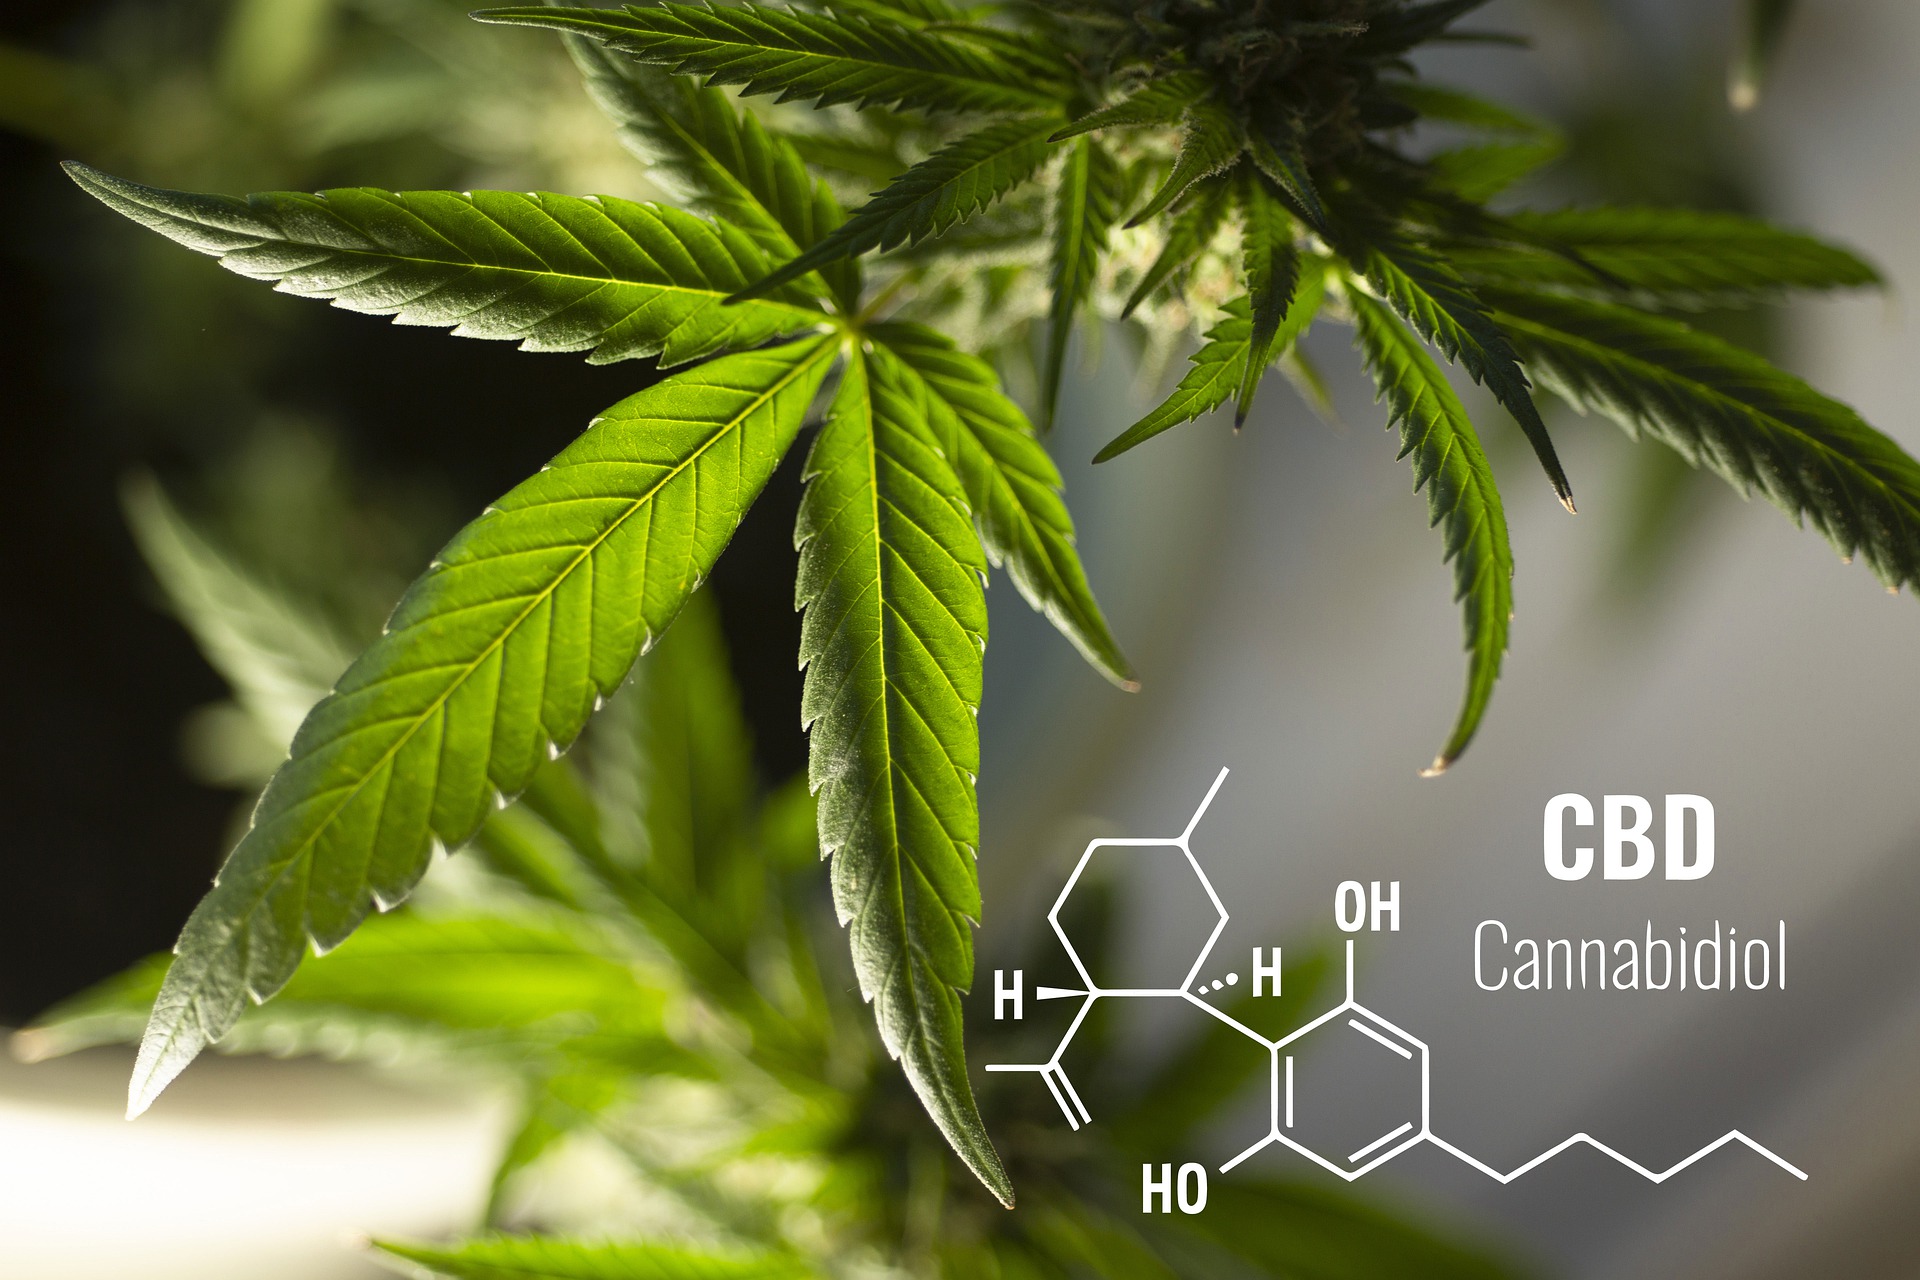 How Long Does CBD Stay In The System?